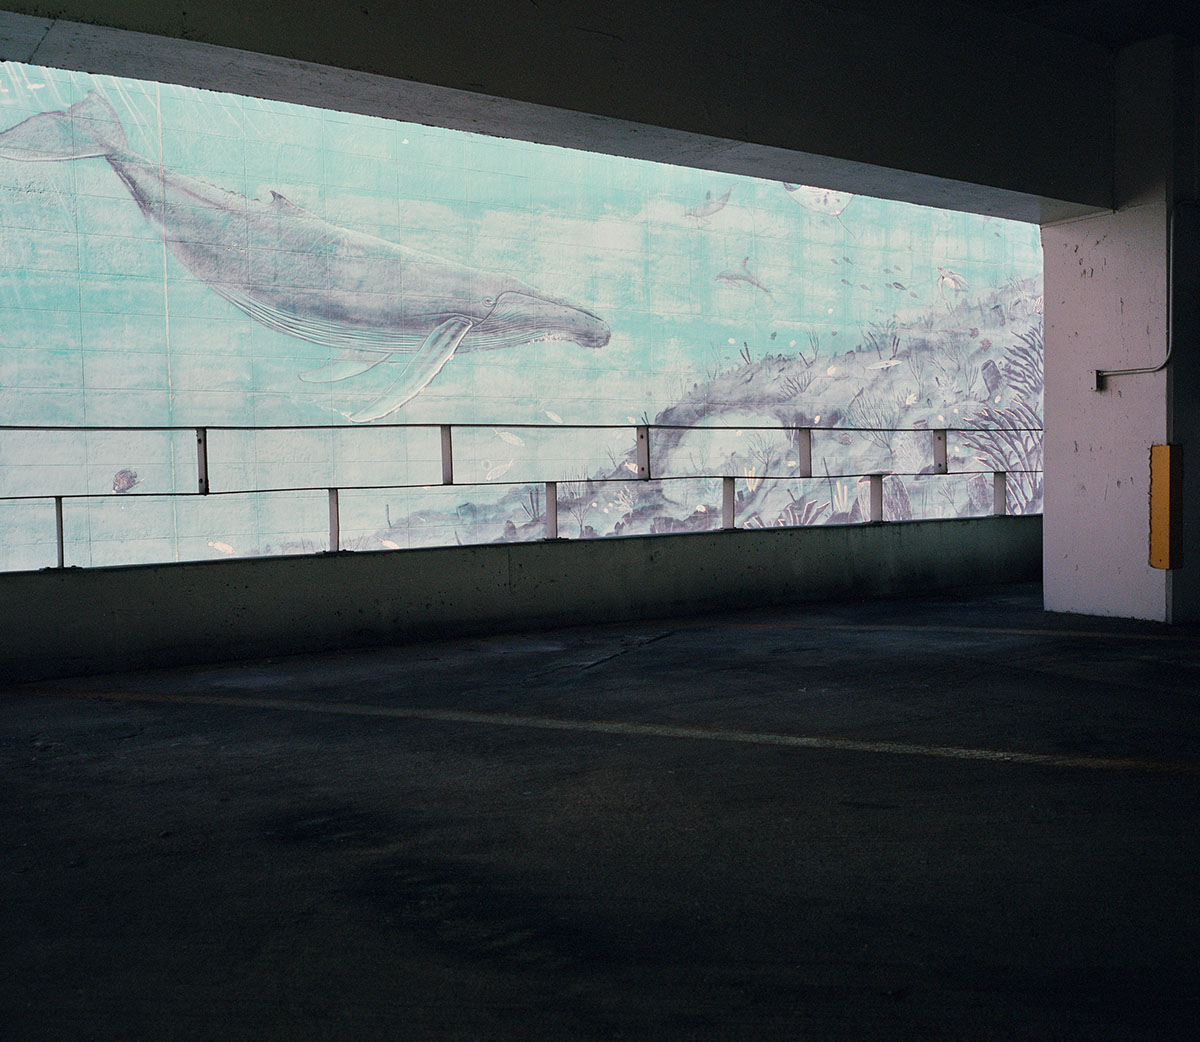 mural of whale